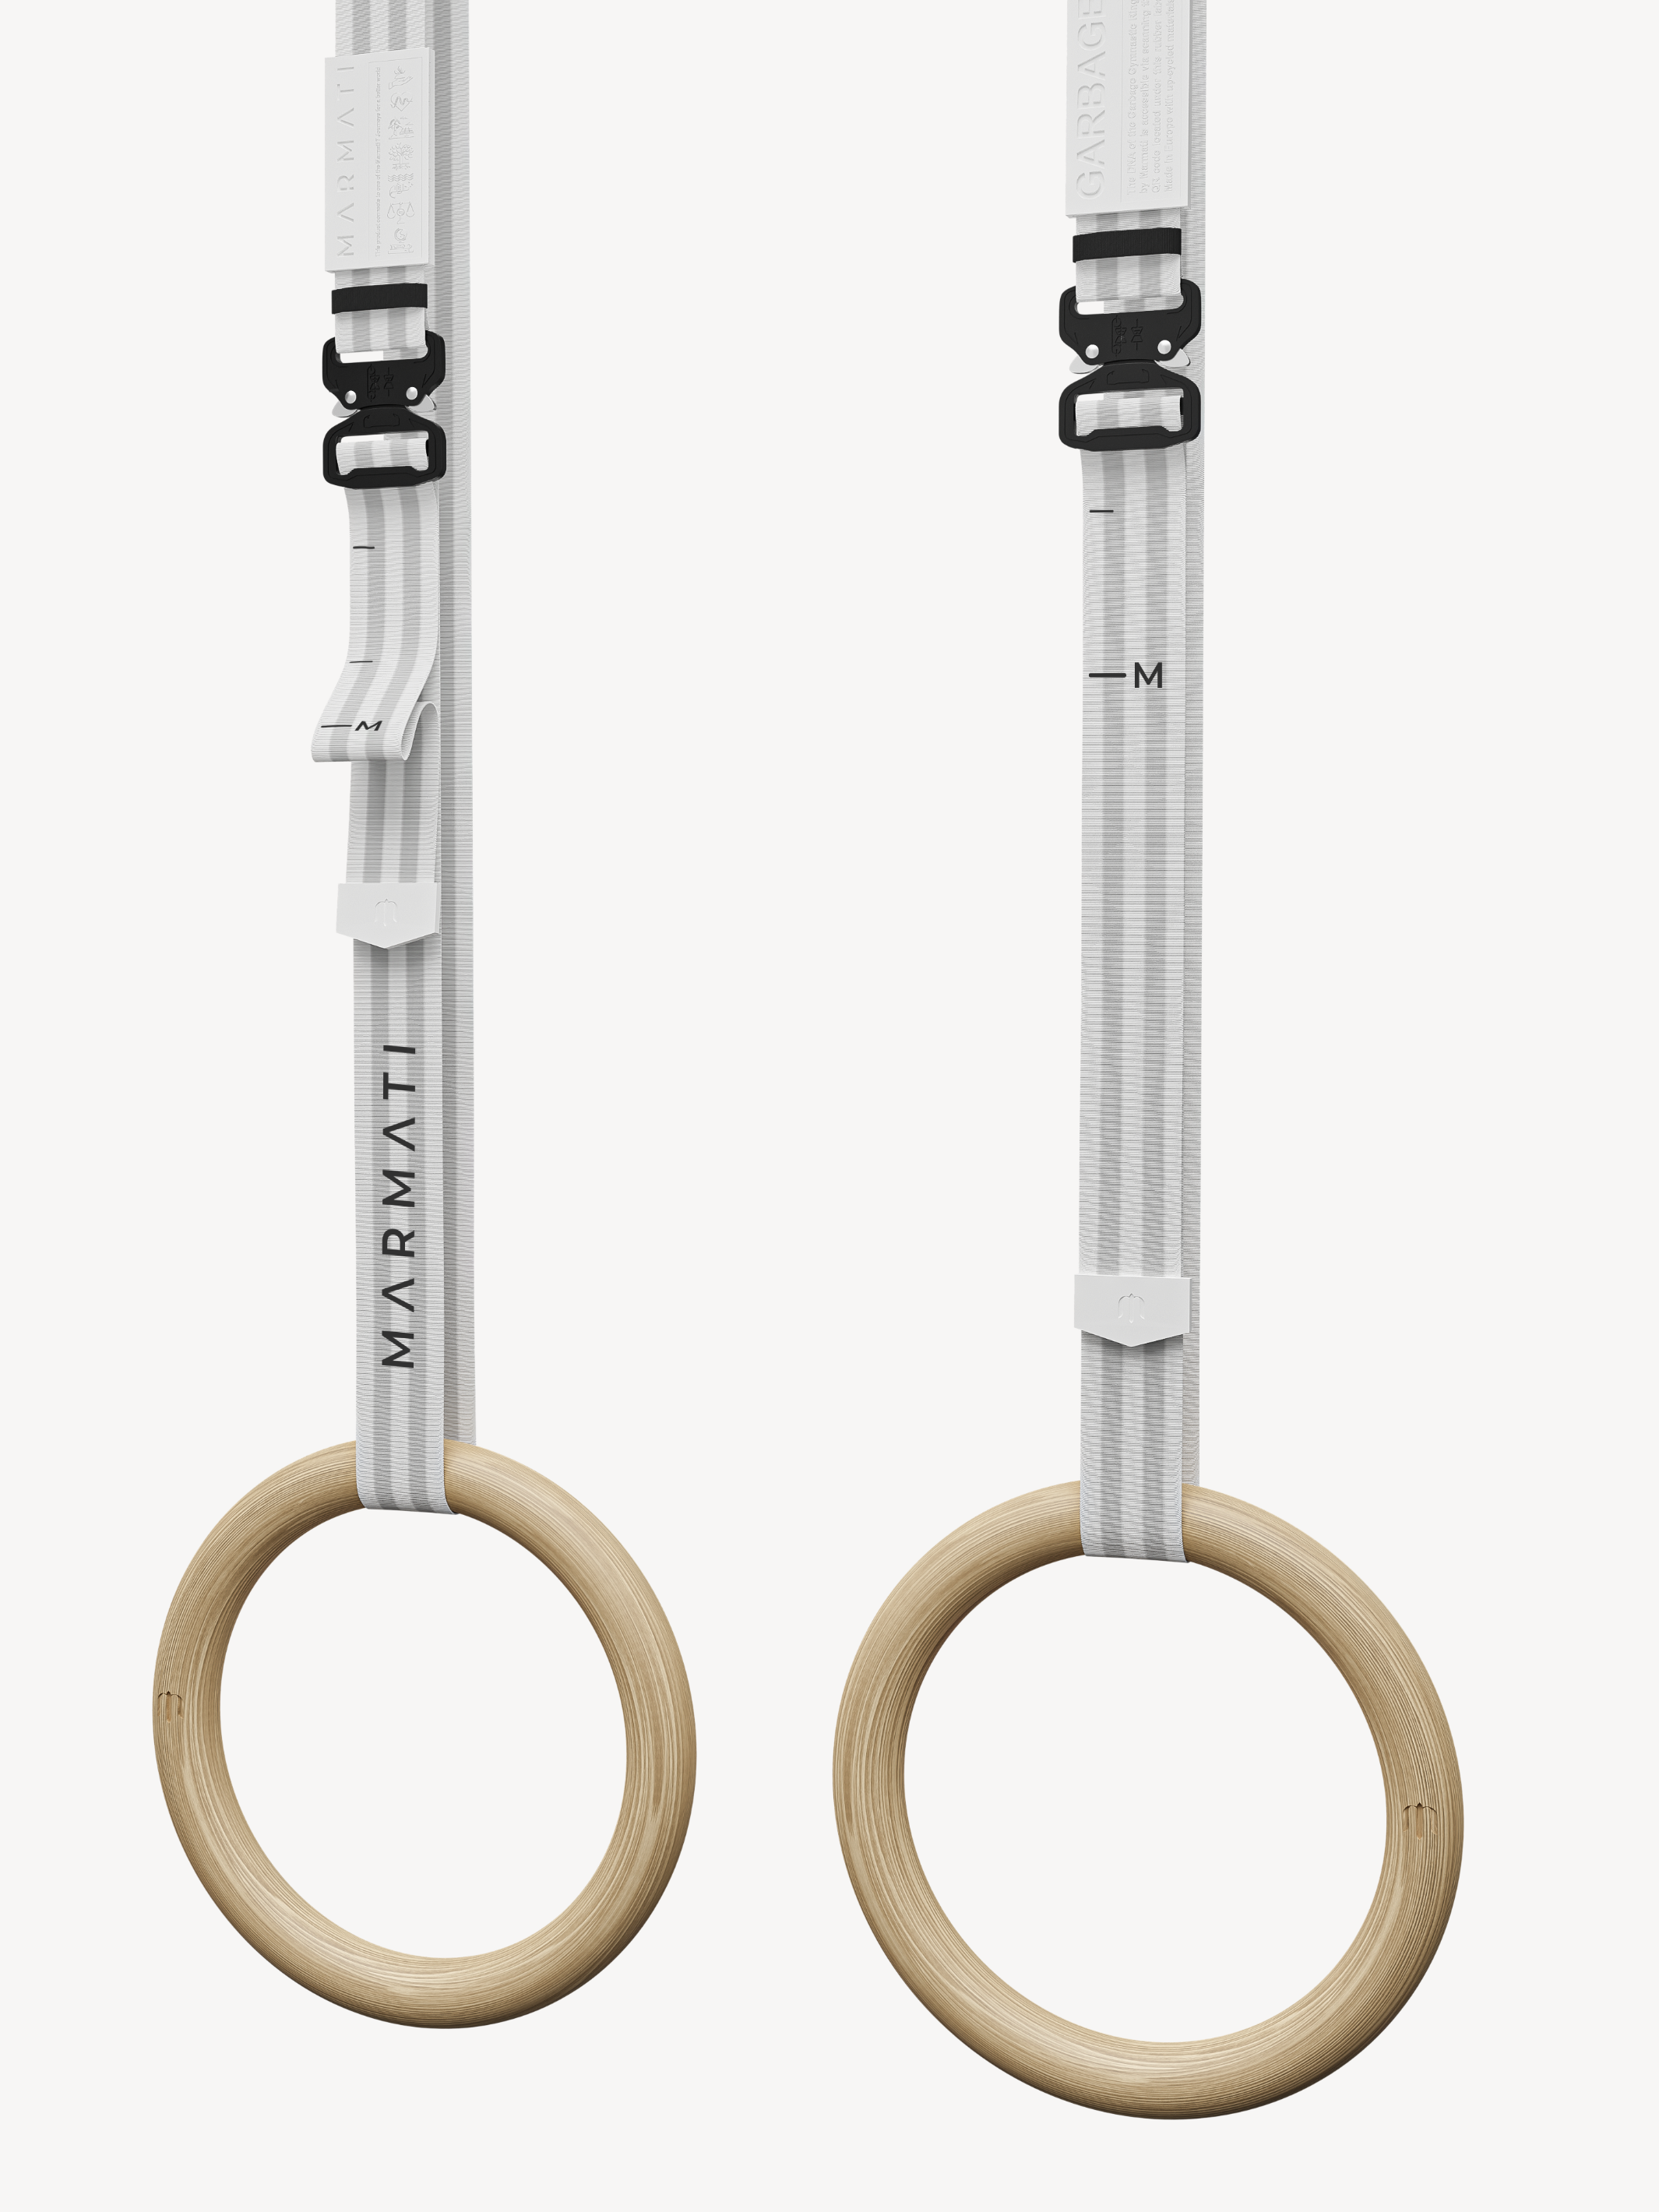 GARBAGE GYMNASTIC RINGS by Marmati in white colour are made from recycled gym rings, creating an eco-friendly exercise option. Get a great workout wherever you are, while also reducing your environmental impact.